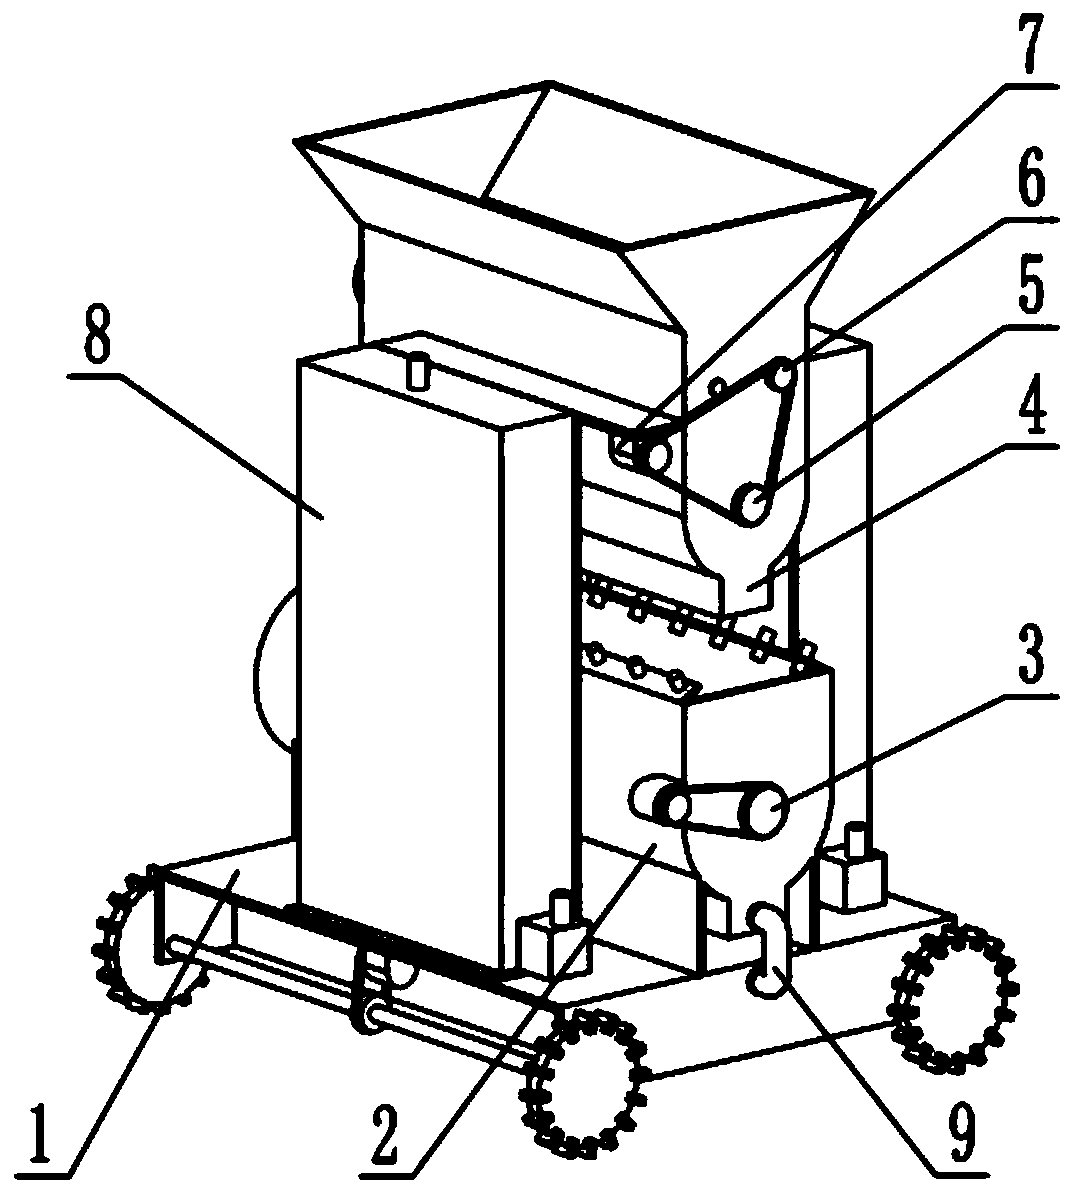 Spraying device for soil treatment